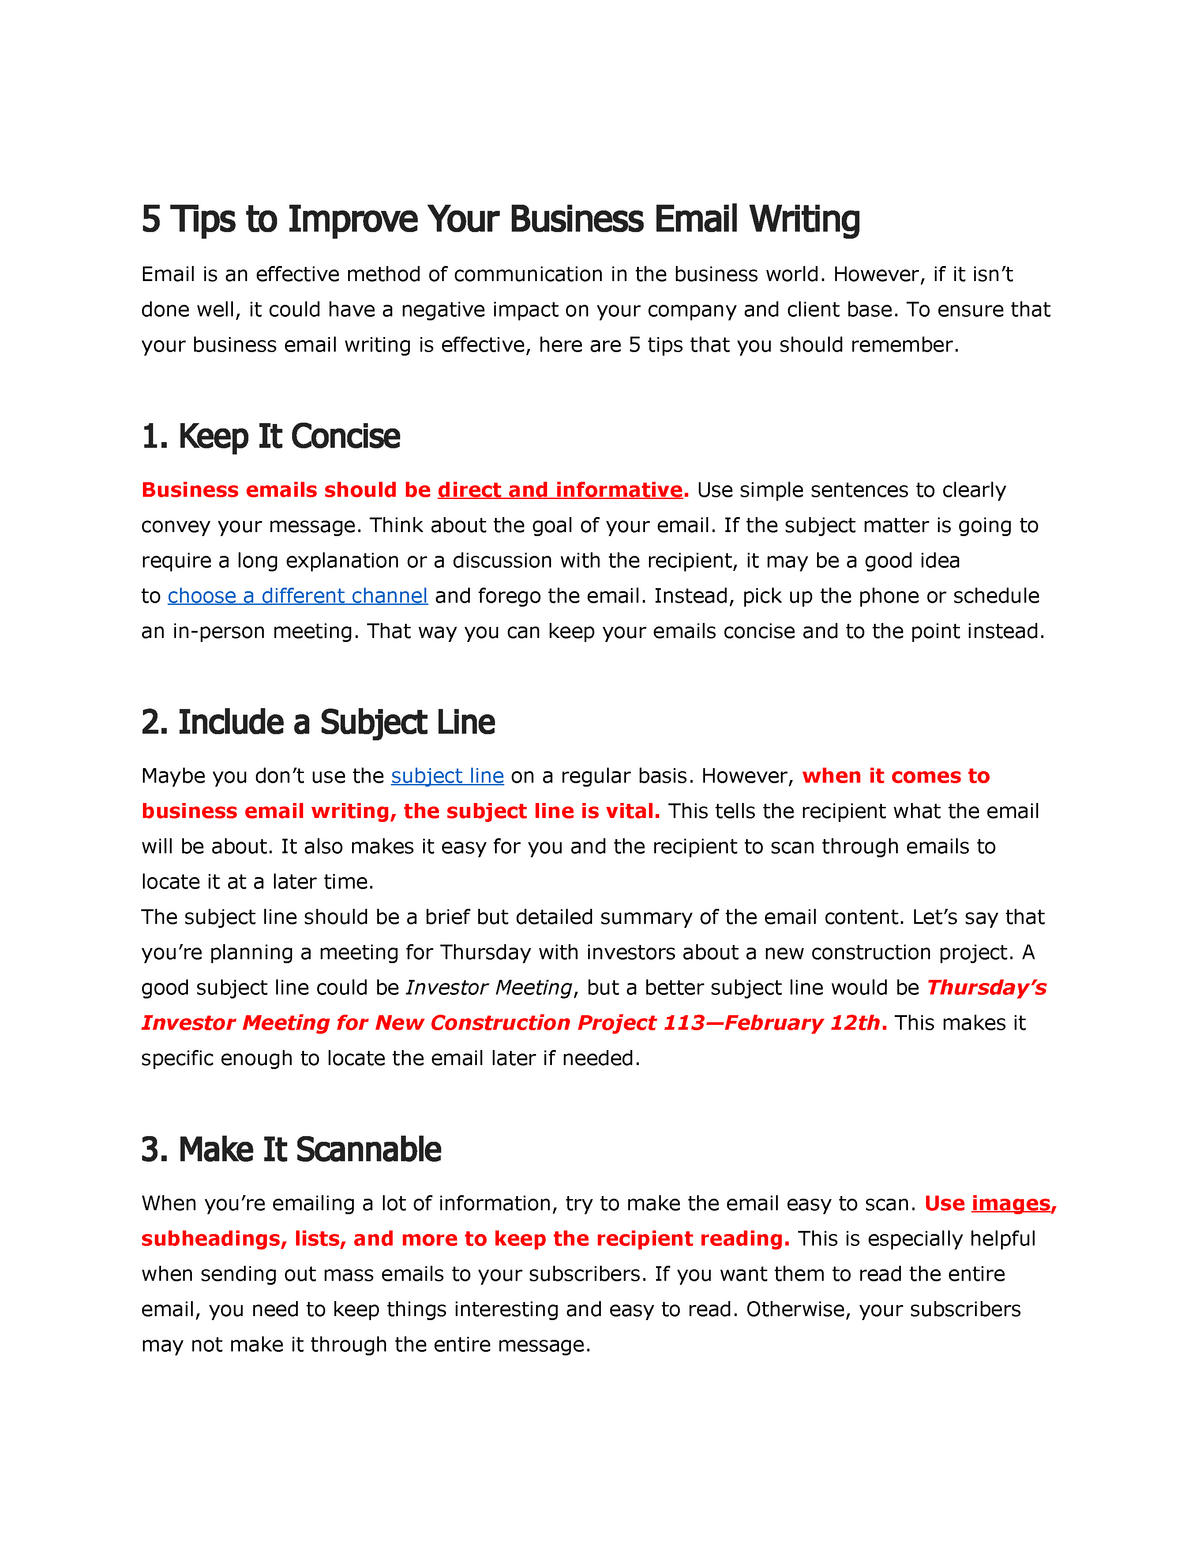 How to write effective business emails? - Valasys Media